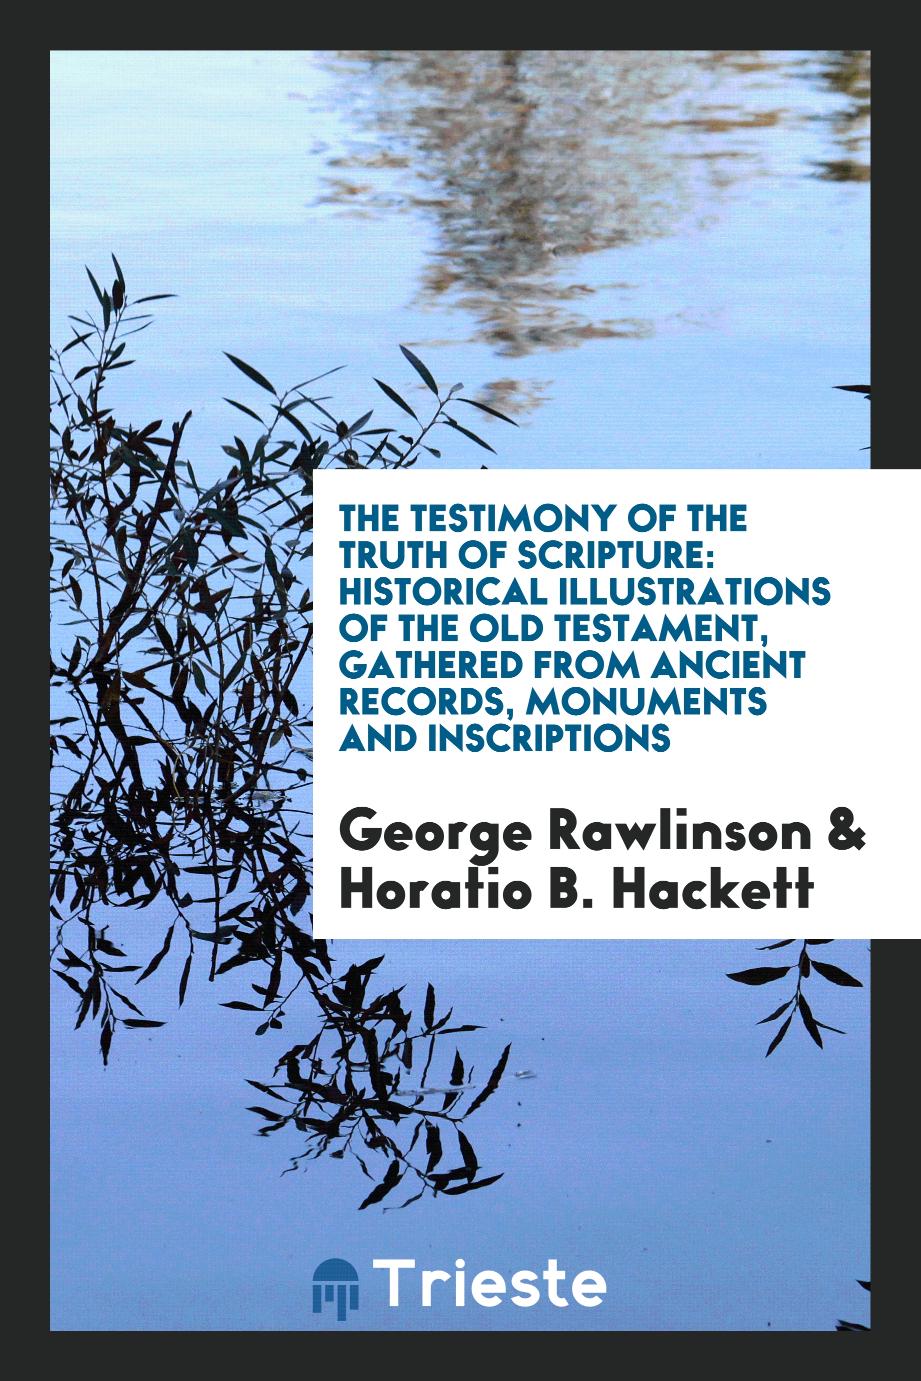 The testimony of the truth of scripture: historical illustrations of the Old Testament, gathered from ancient records, monuments and inscriptions